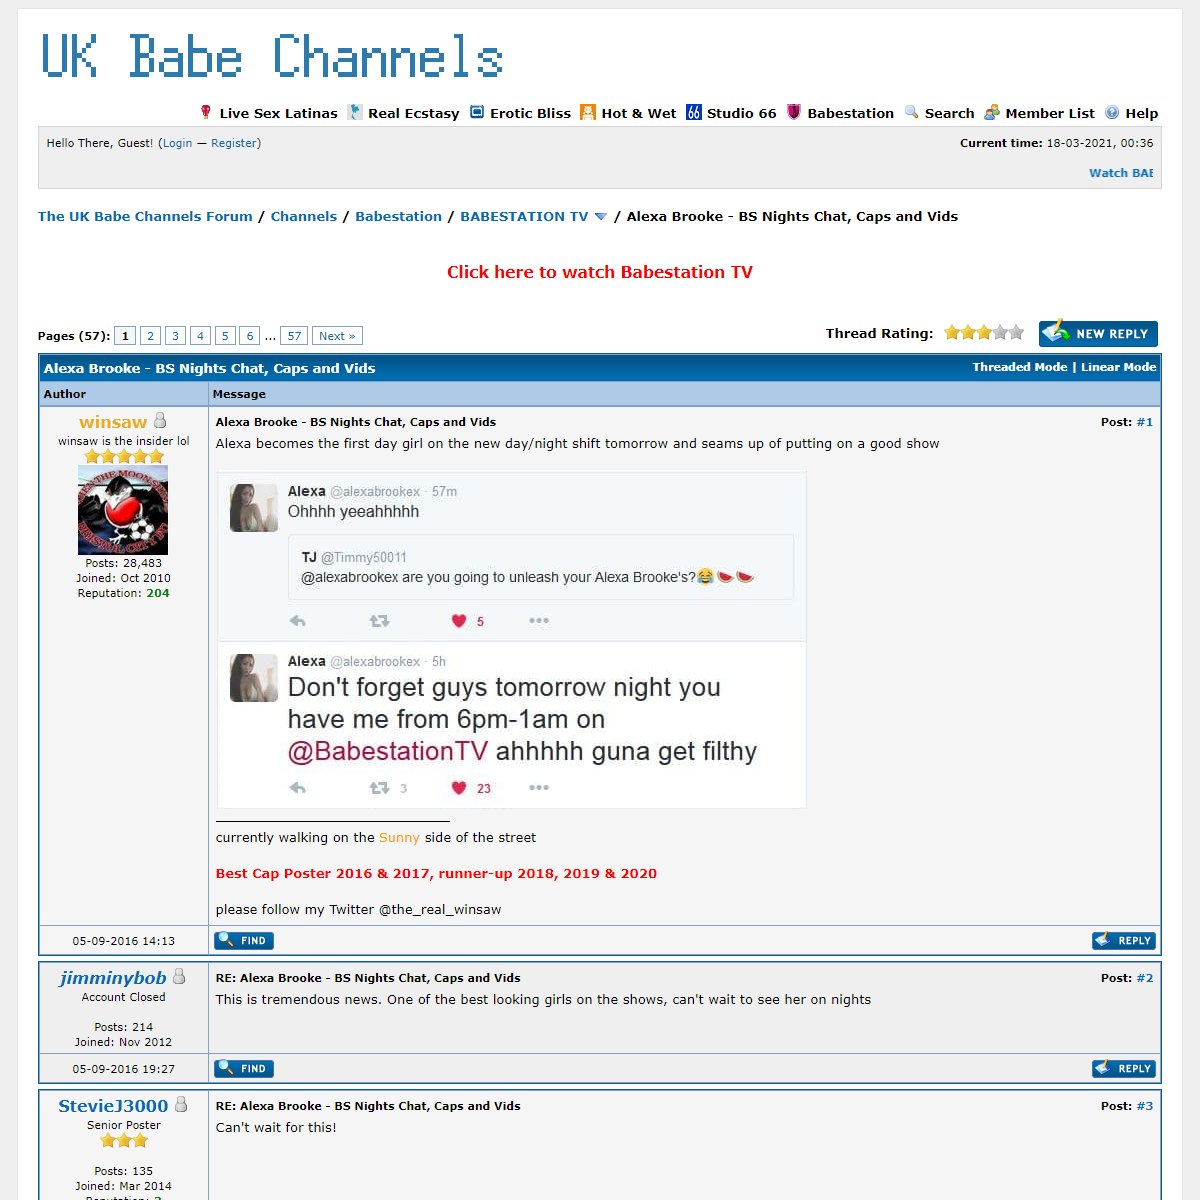 A complete backup of https://babeshows.co.uk/showthread.php?tid=68744